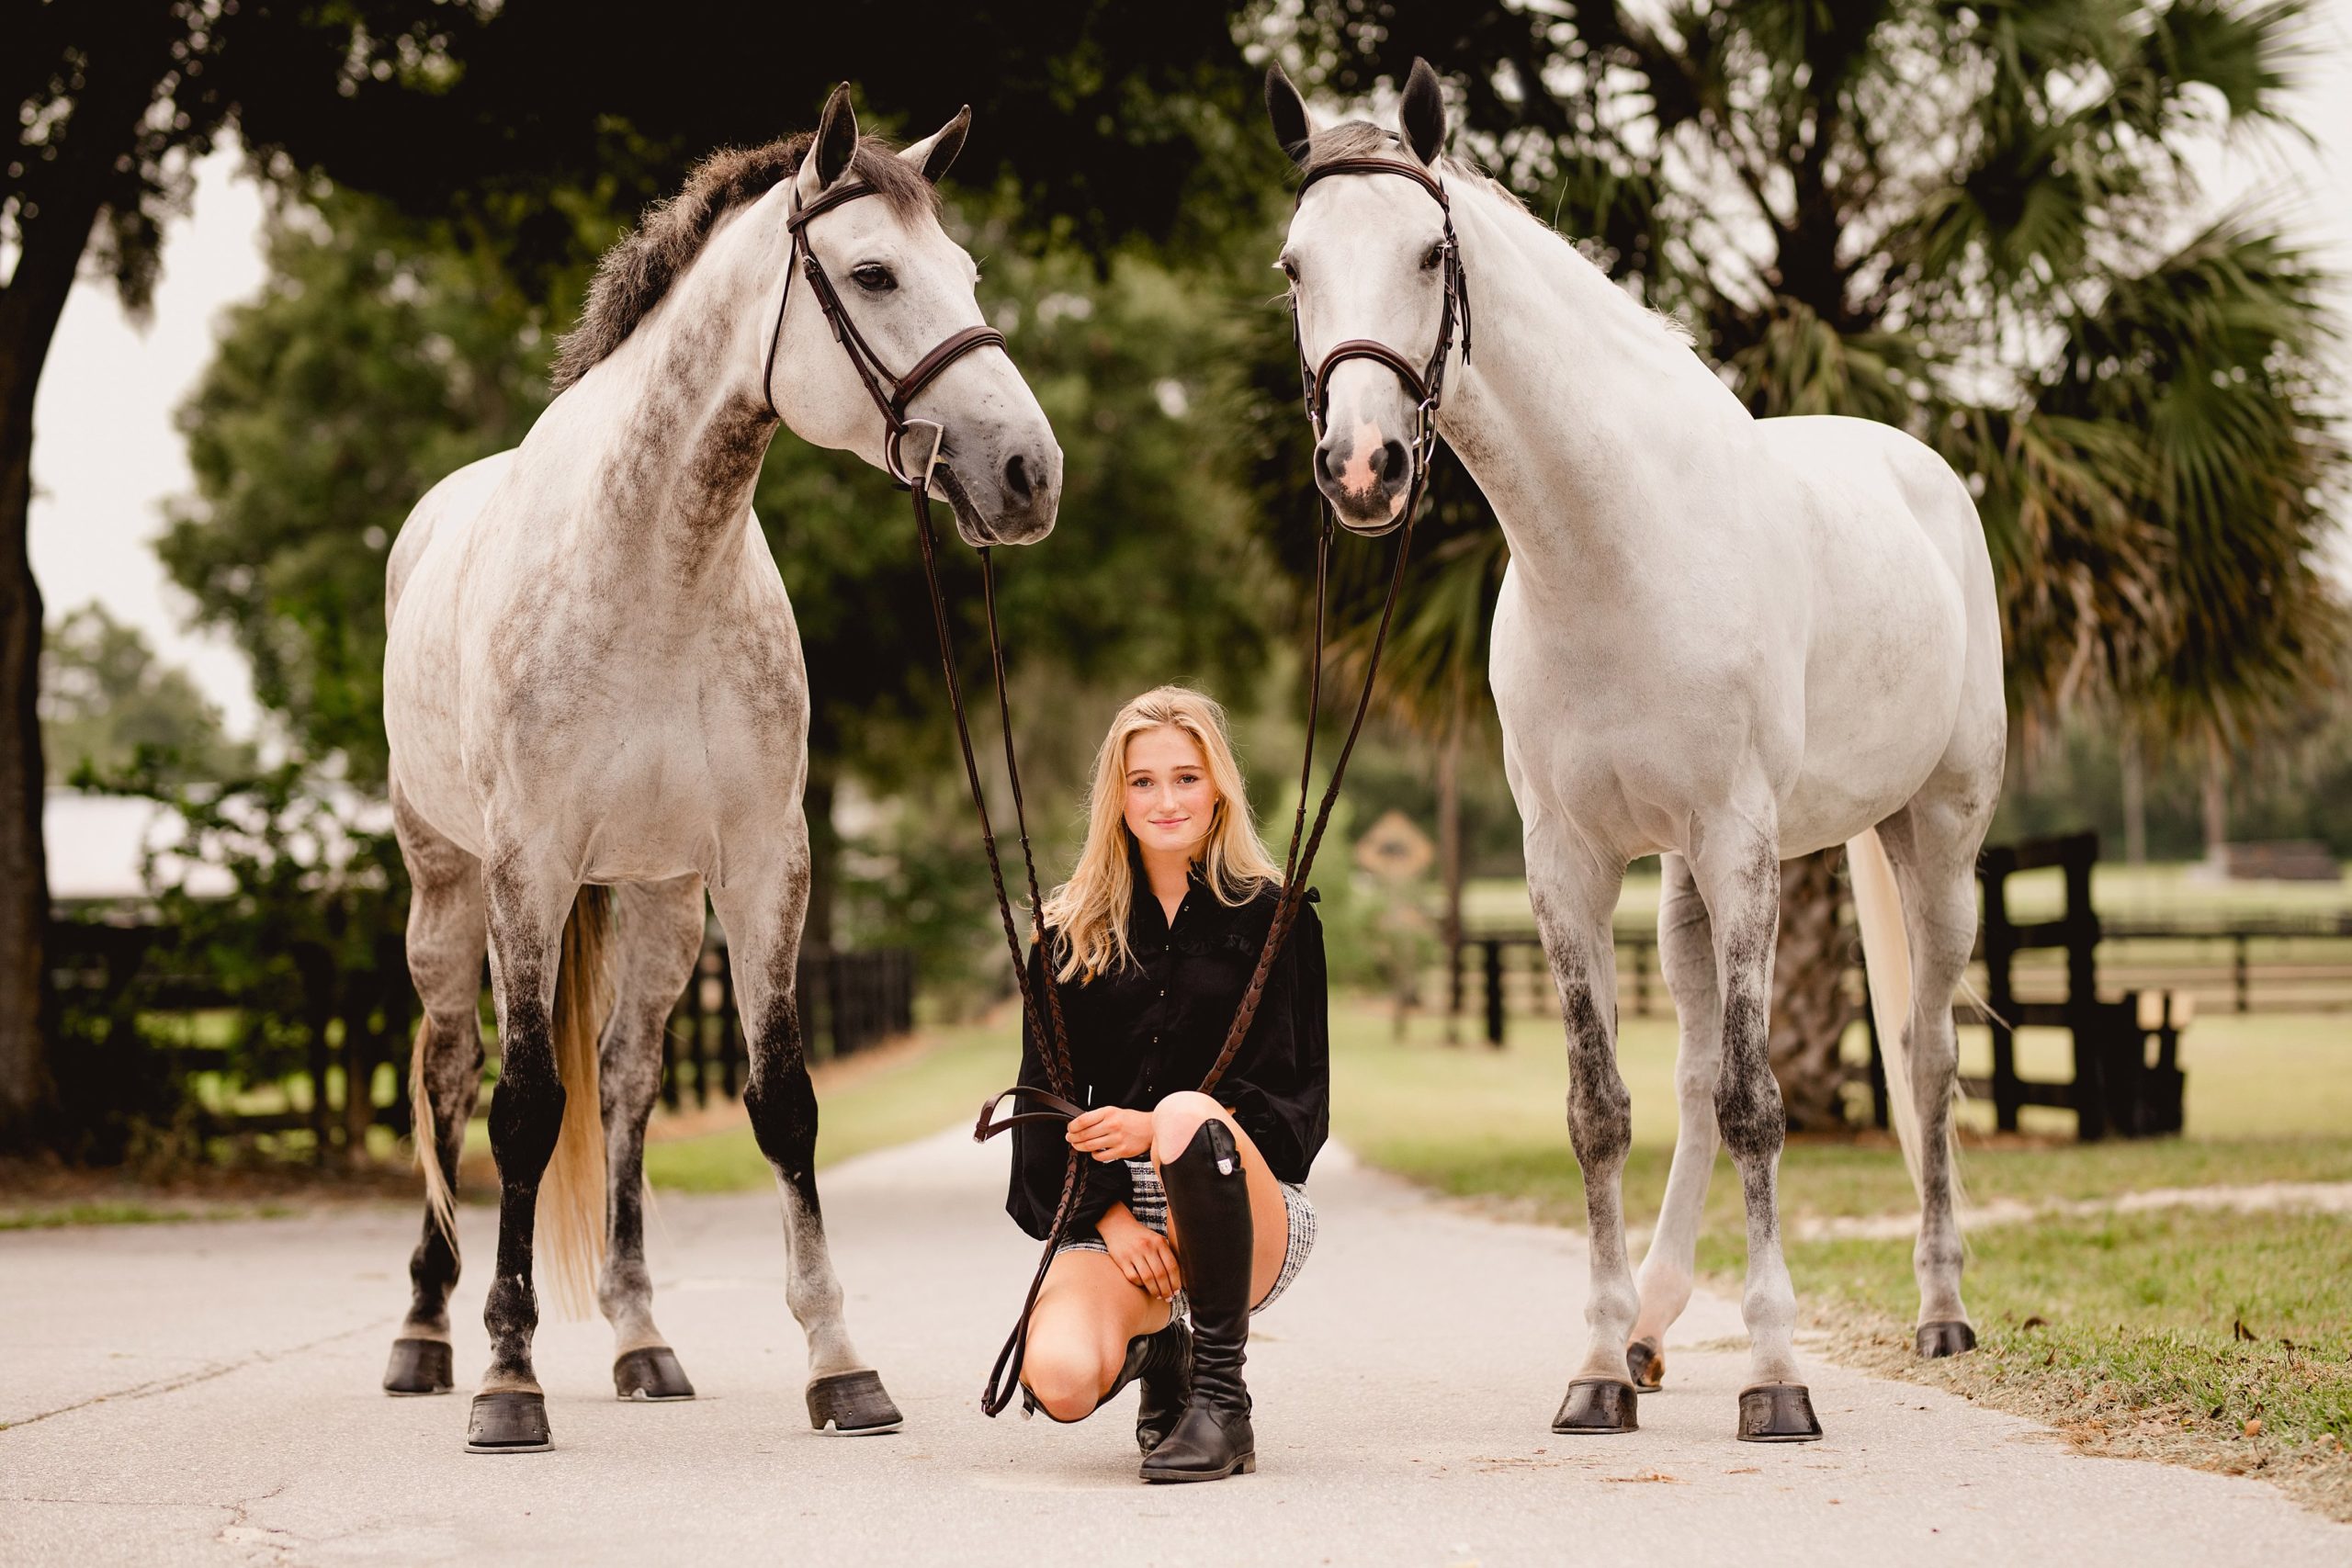 Equestrian styled photoshoot in Ocala, FL. Florida horse photographer. Grey horses. Stable to street.